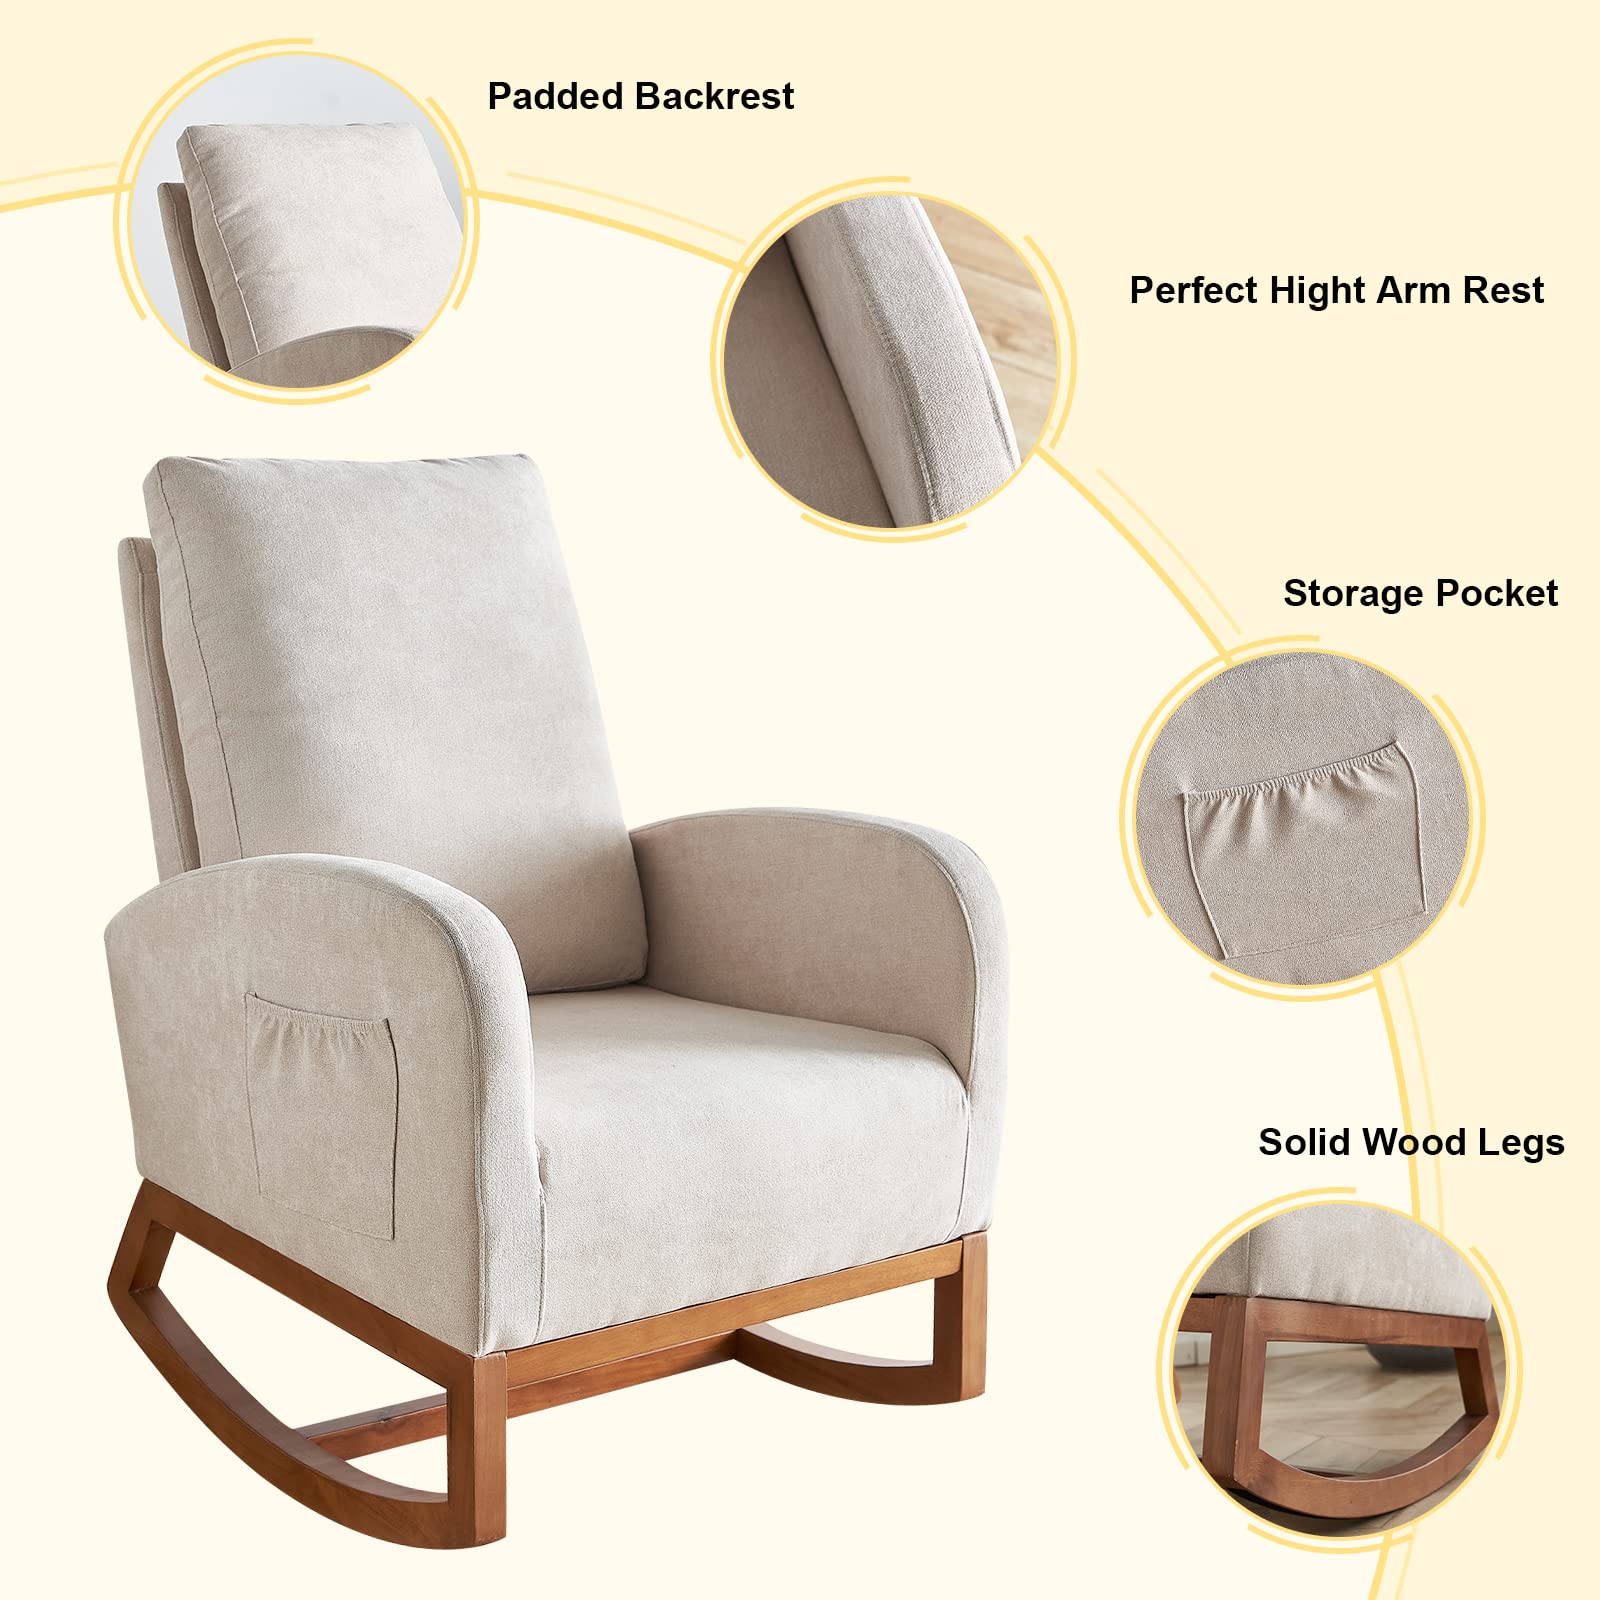 CALABASH Rocking Chair Nursery,Modern Comfy Armchair with Side Pocket,Mid-Century Upholstered Glider Rocker Chairs for Baby/Kids Room and Living Room (New Beige)